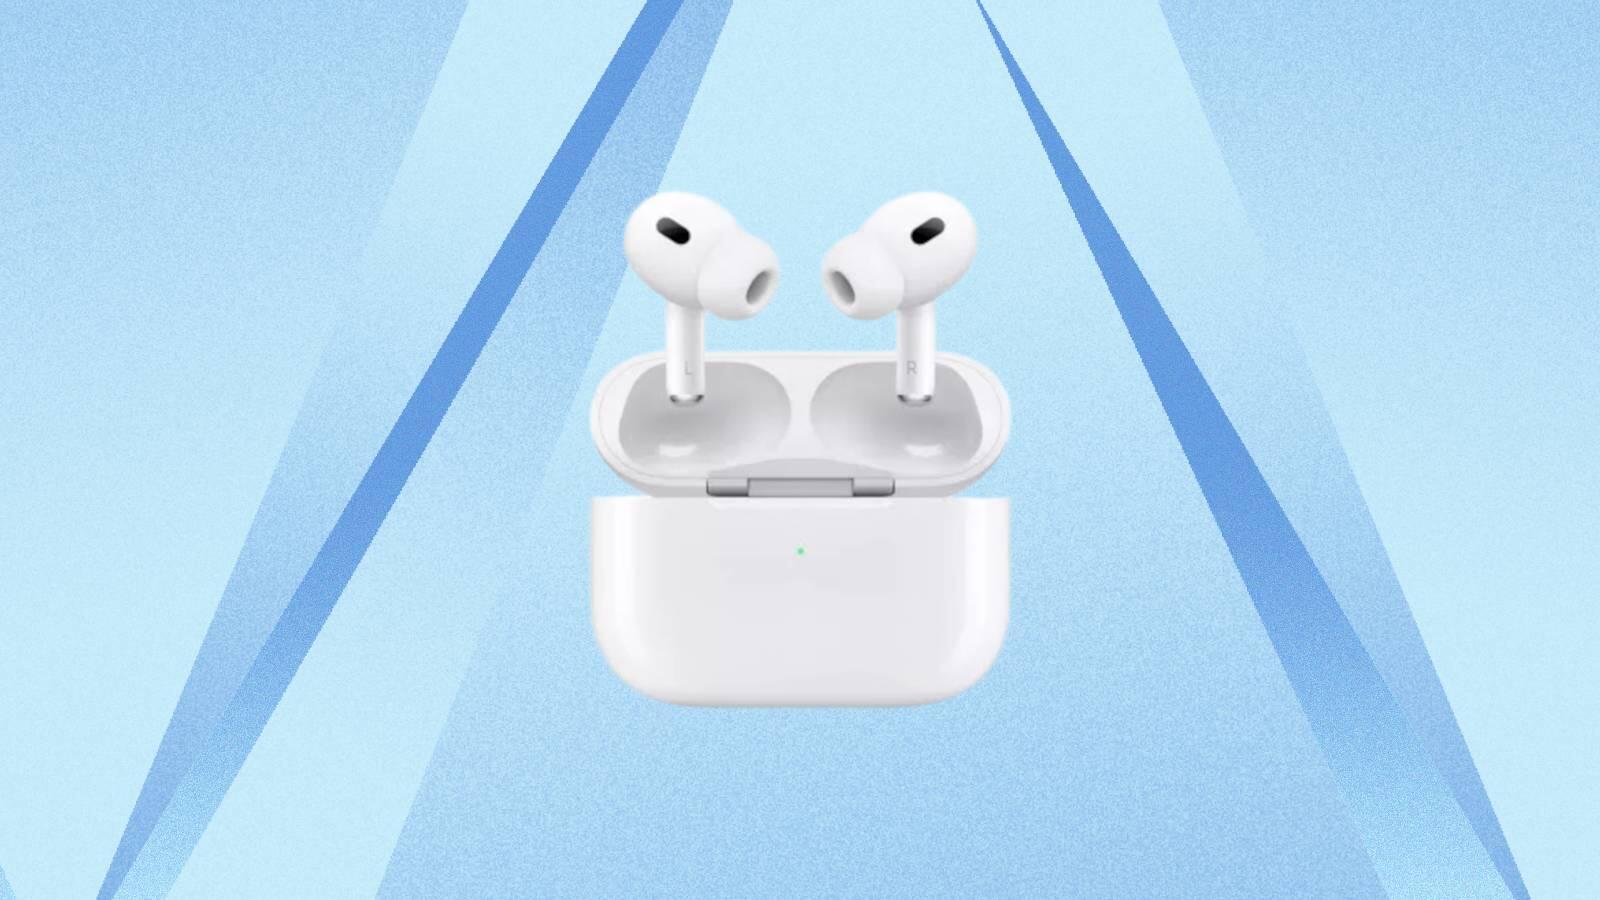 AirPods Pro, iPad, Fire Stick and More: Get These Prime Day Deals